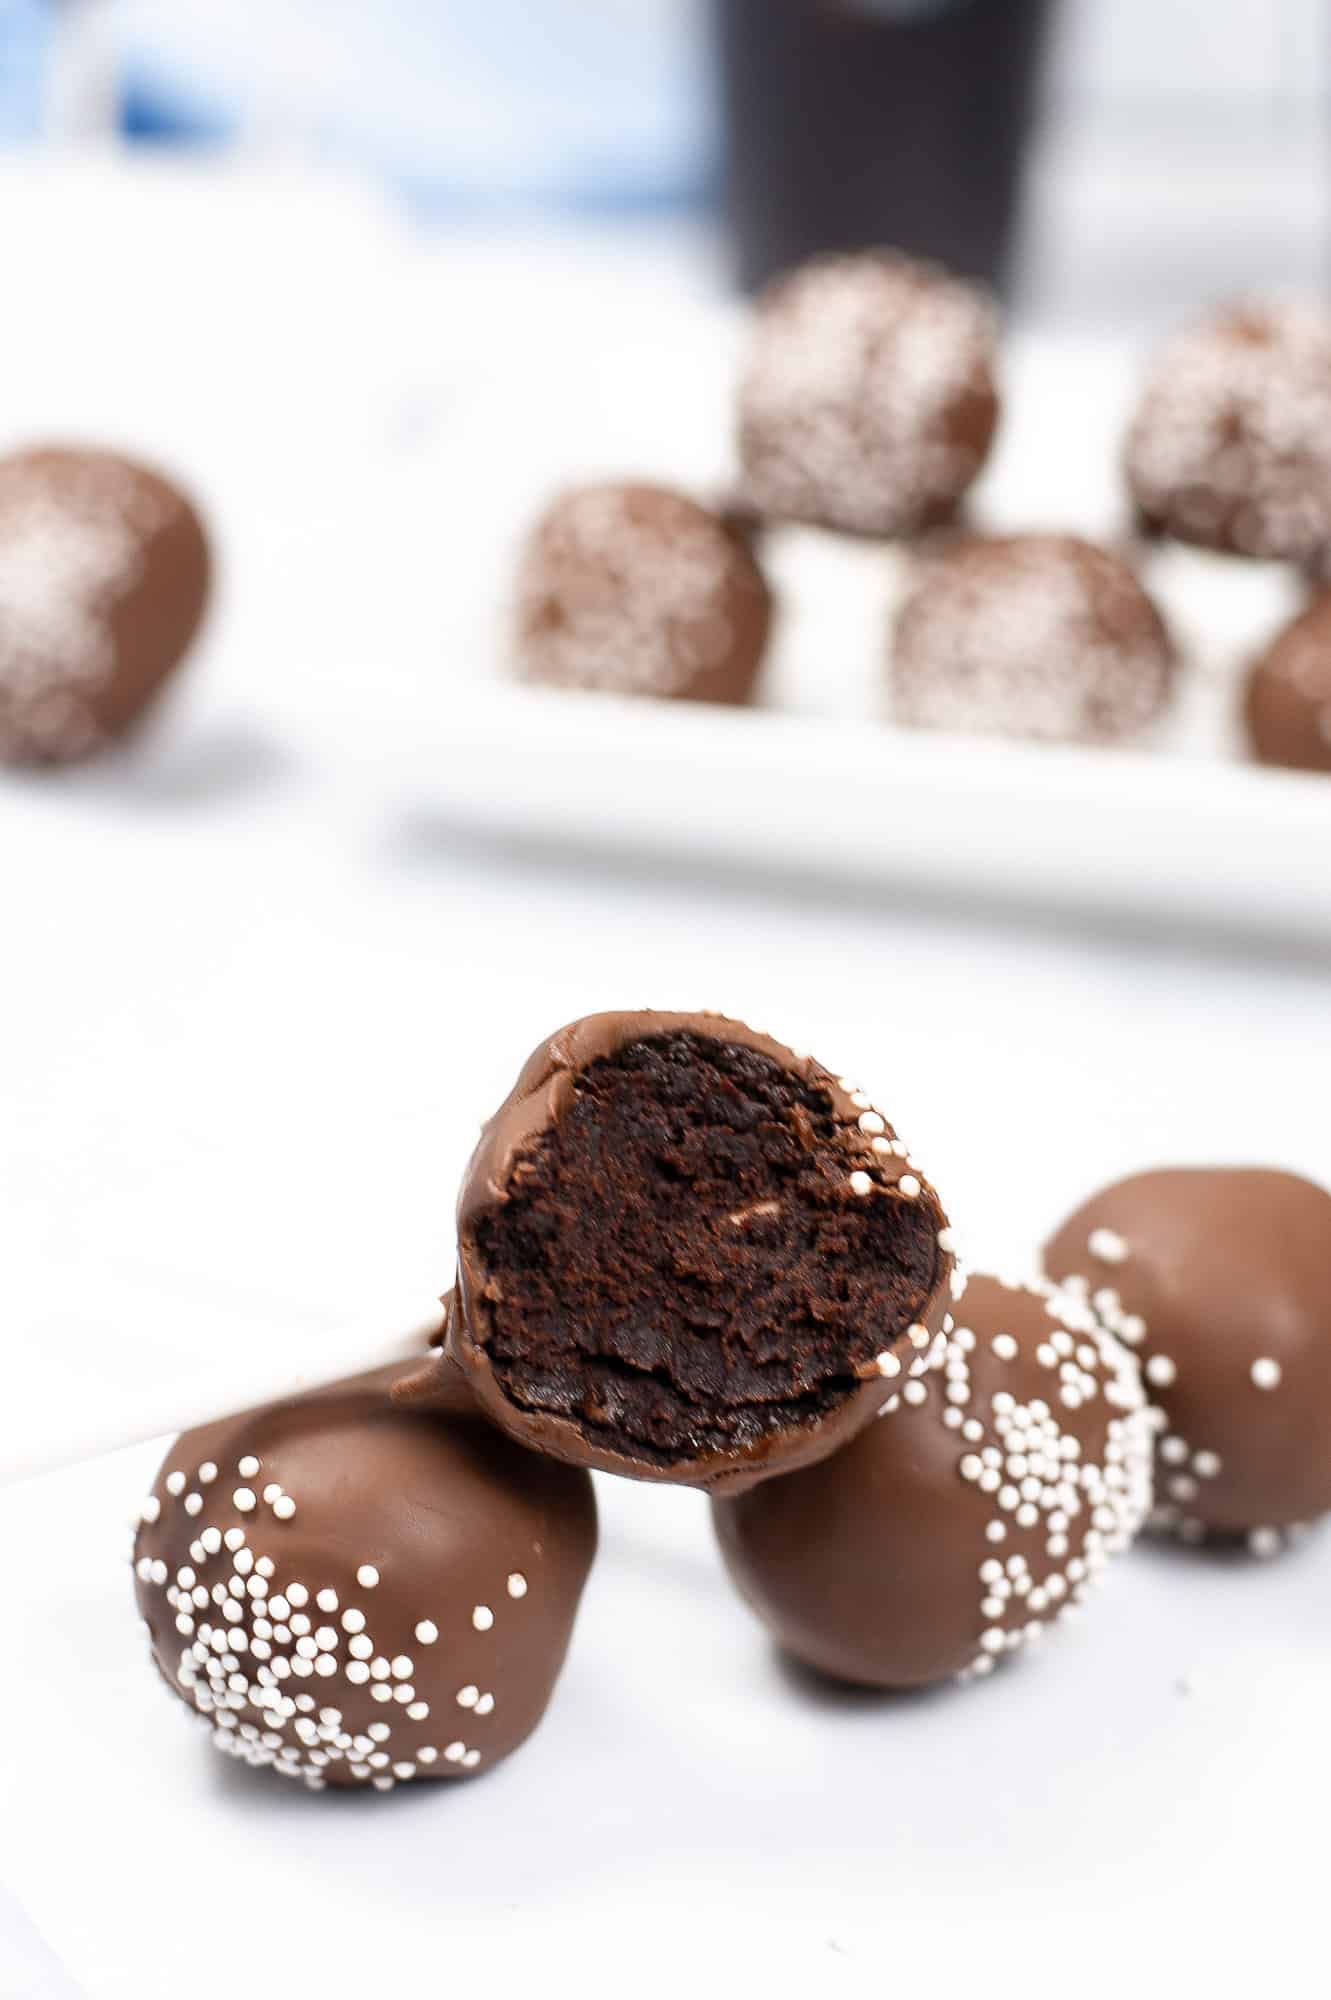 How to Make Incredibly Easy and Authentic Starbucks Chocolate Cake Pops